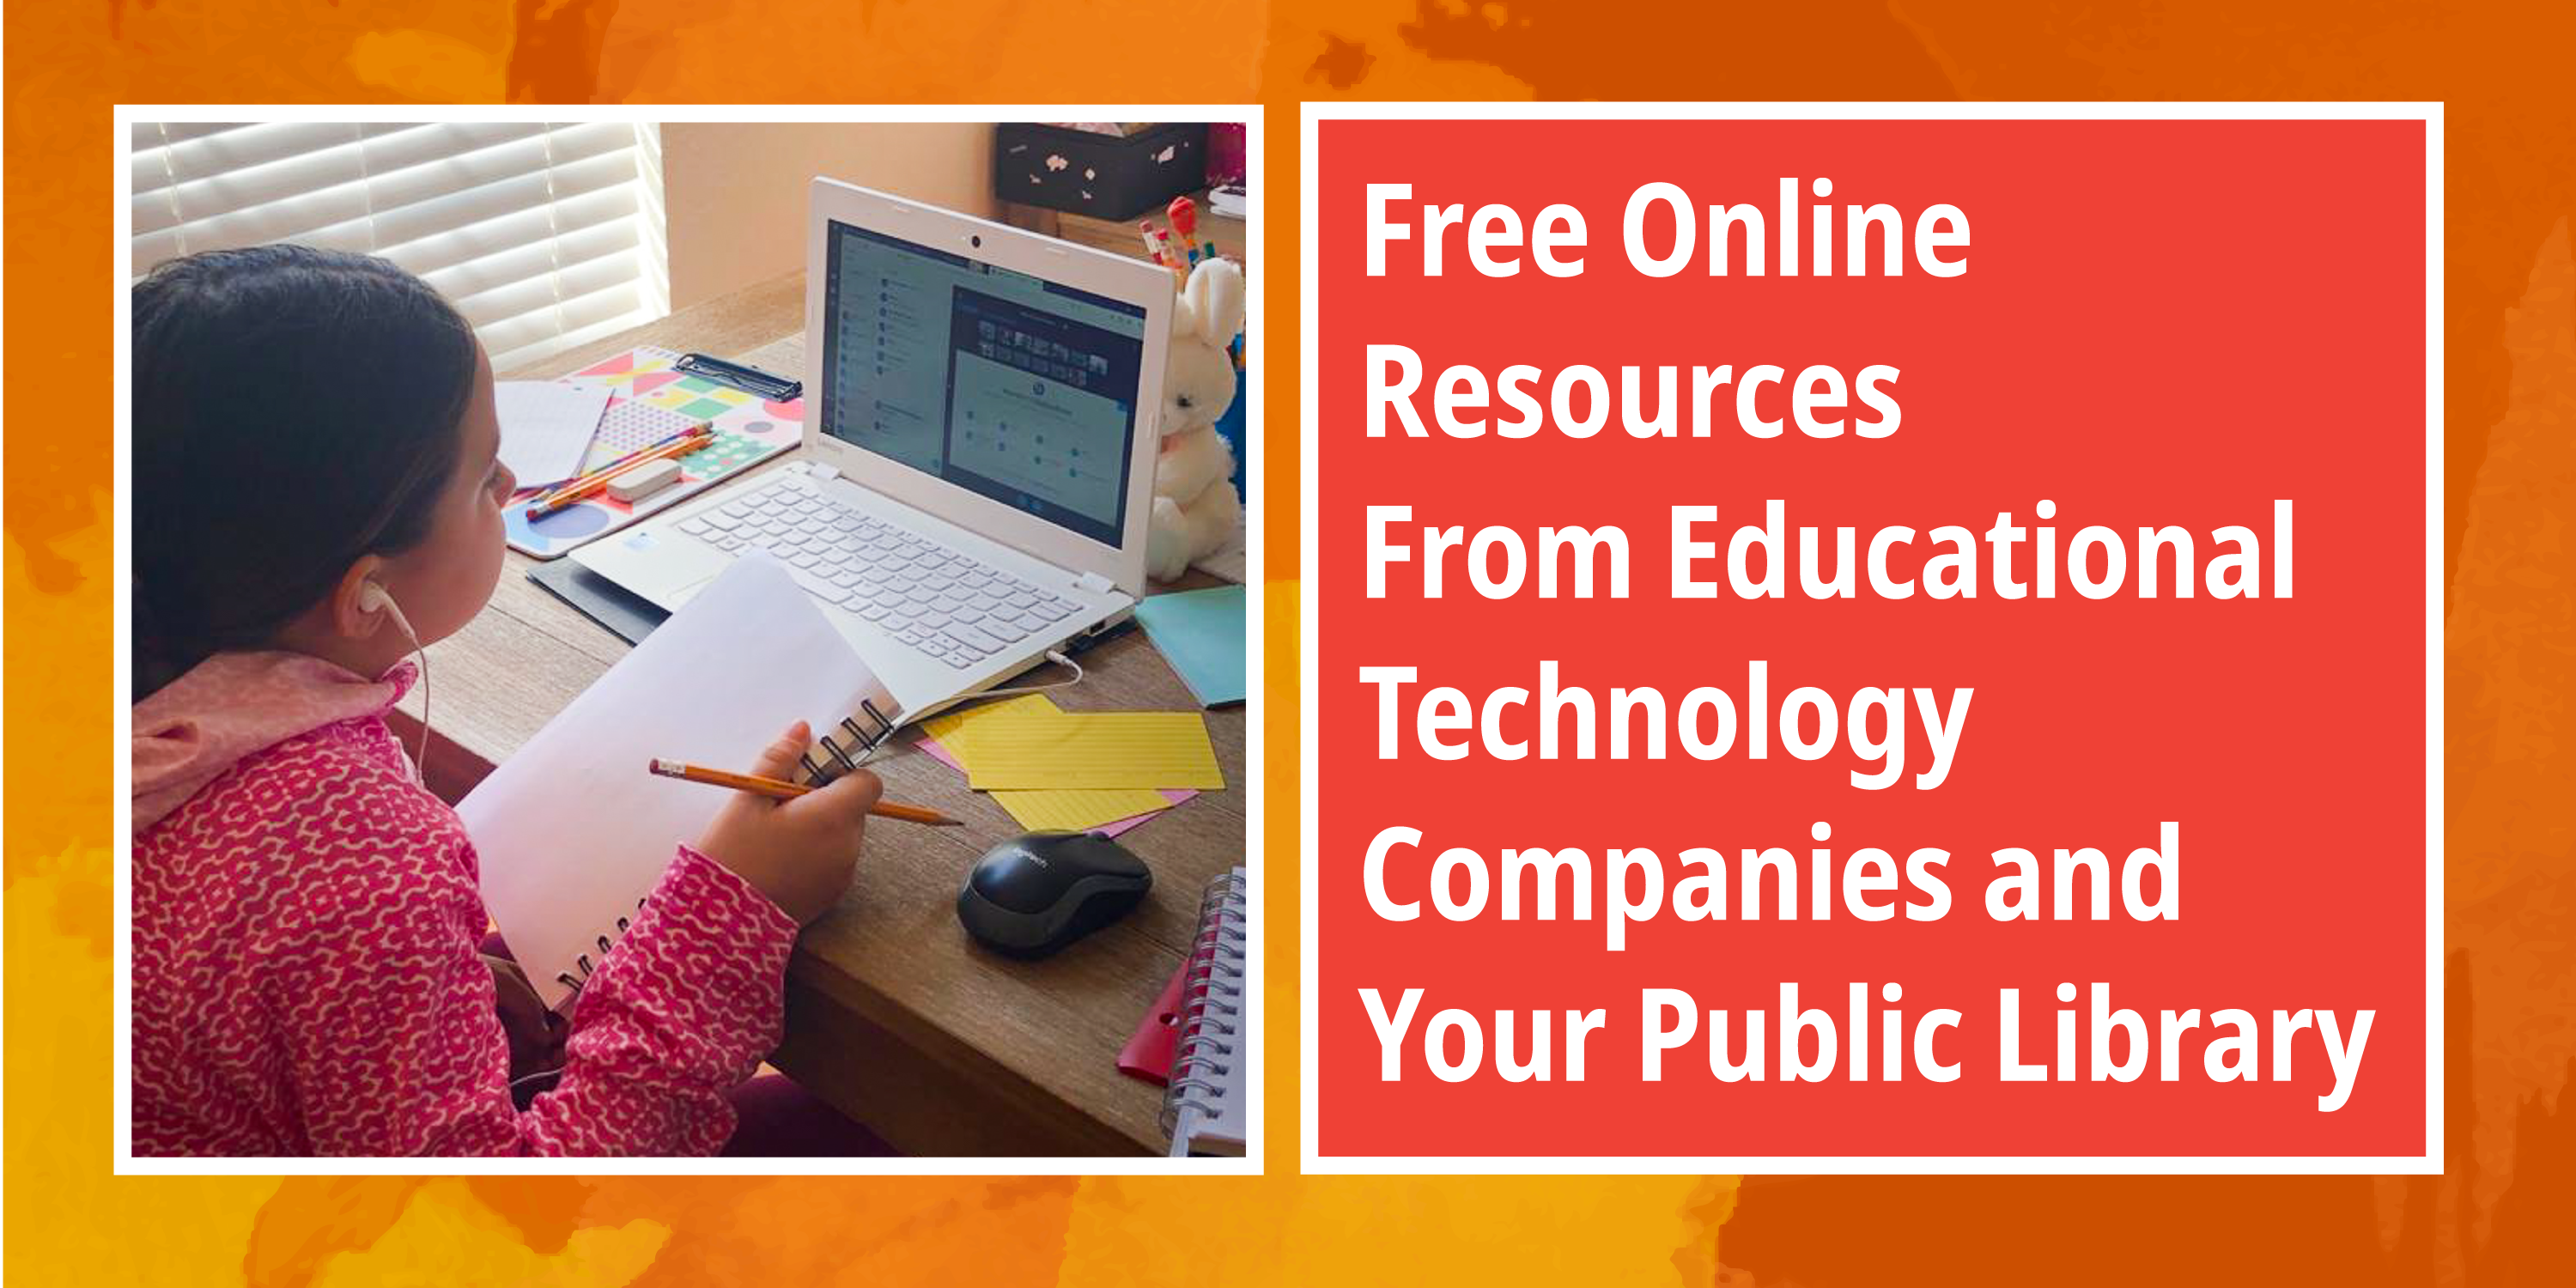 Free Online Resources from Educational Technology Companies and Your Public Library